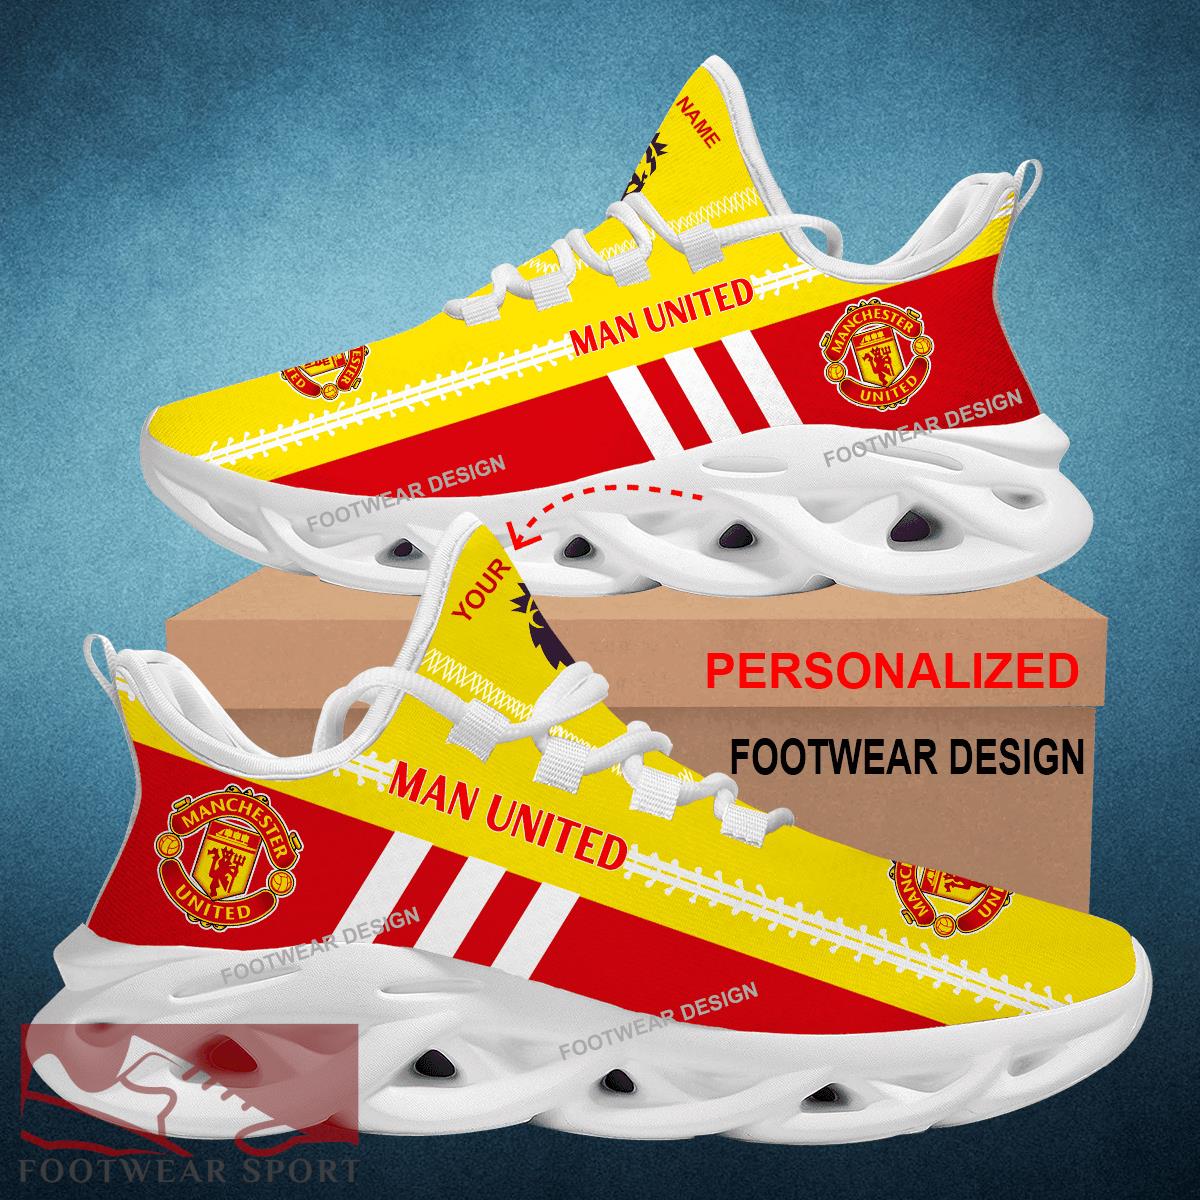 EPL Manchester United Chunky Shoes New Design Gift Fans Max Soul Sneakers Personalized - EPL Manchester United Logo New Chunky Shoes Photo 2